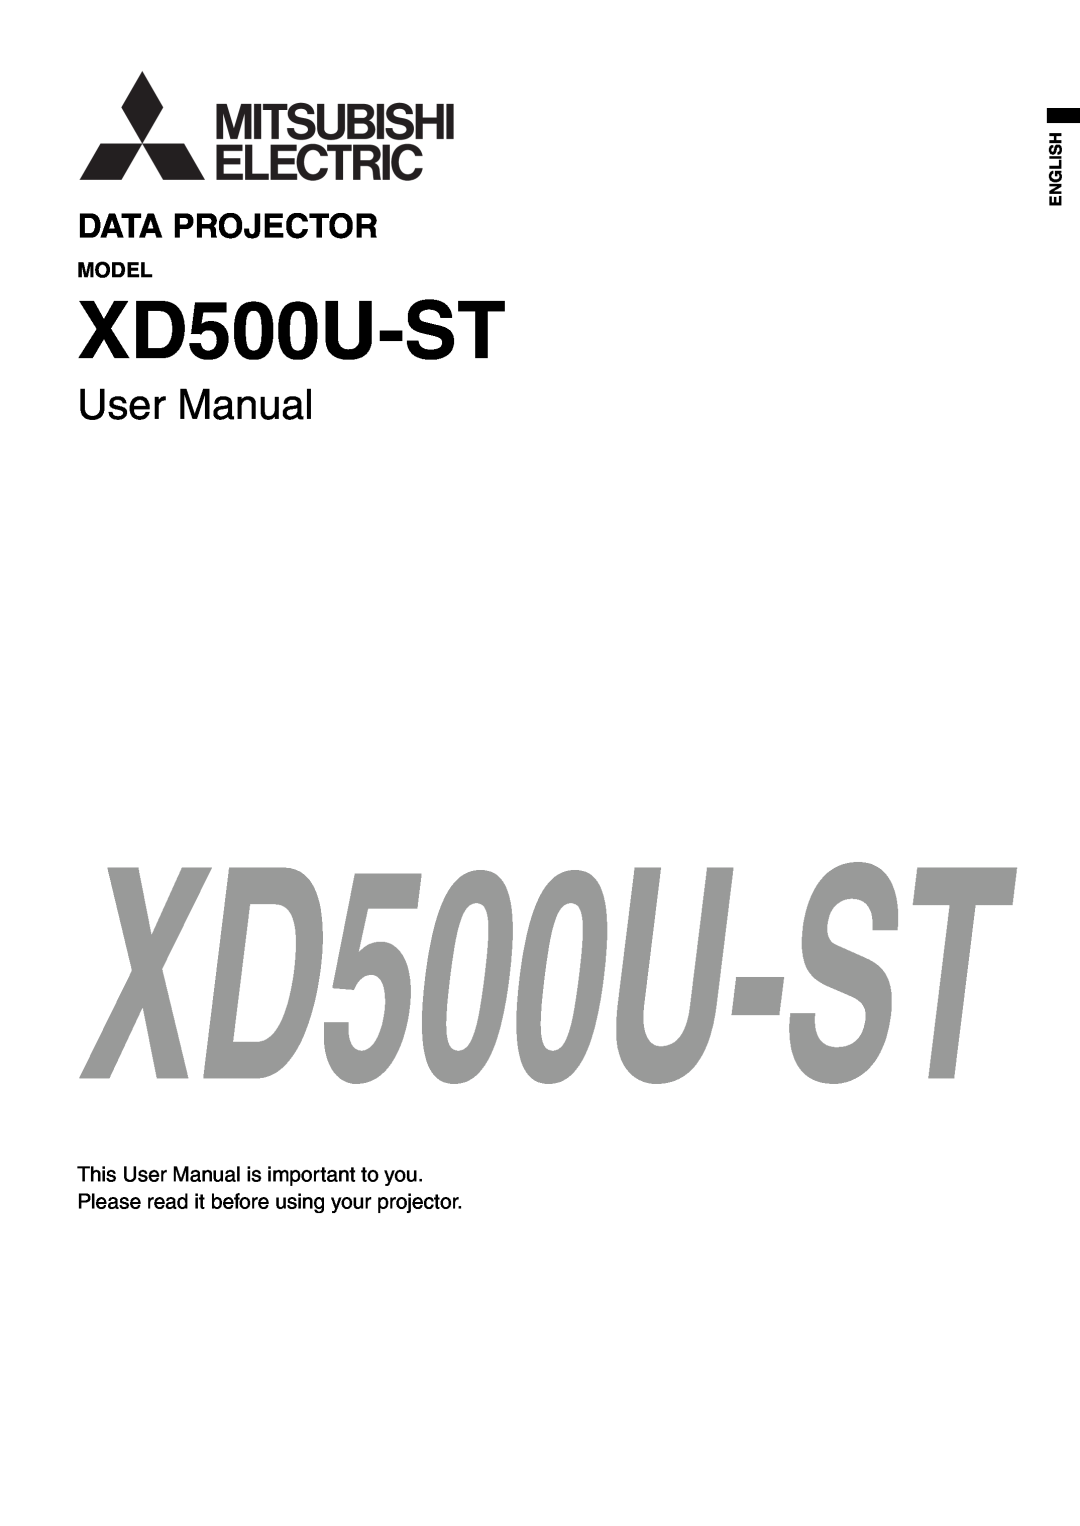 Mitsubishi Electronics XD500U-ST user manual Model, This User Manual is important to you, English, Data Projector 